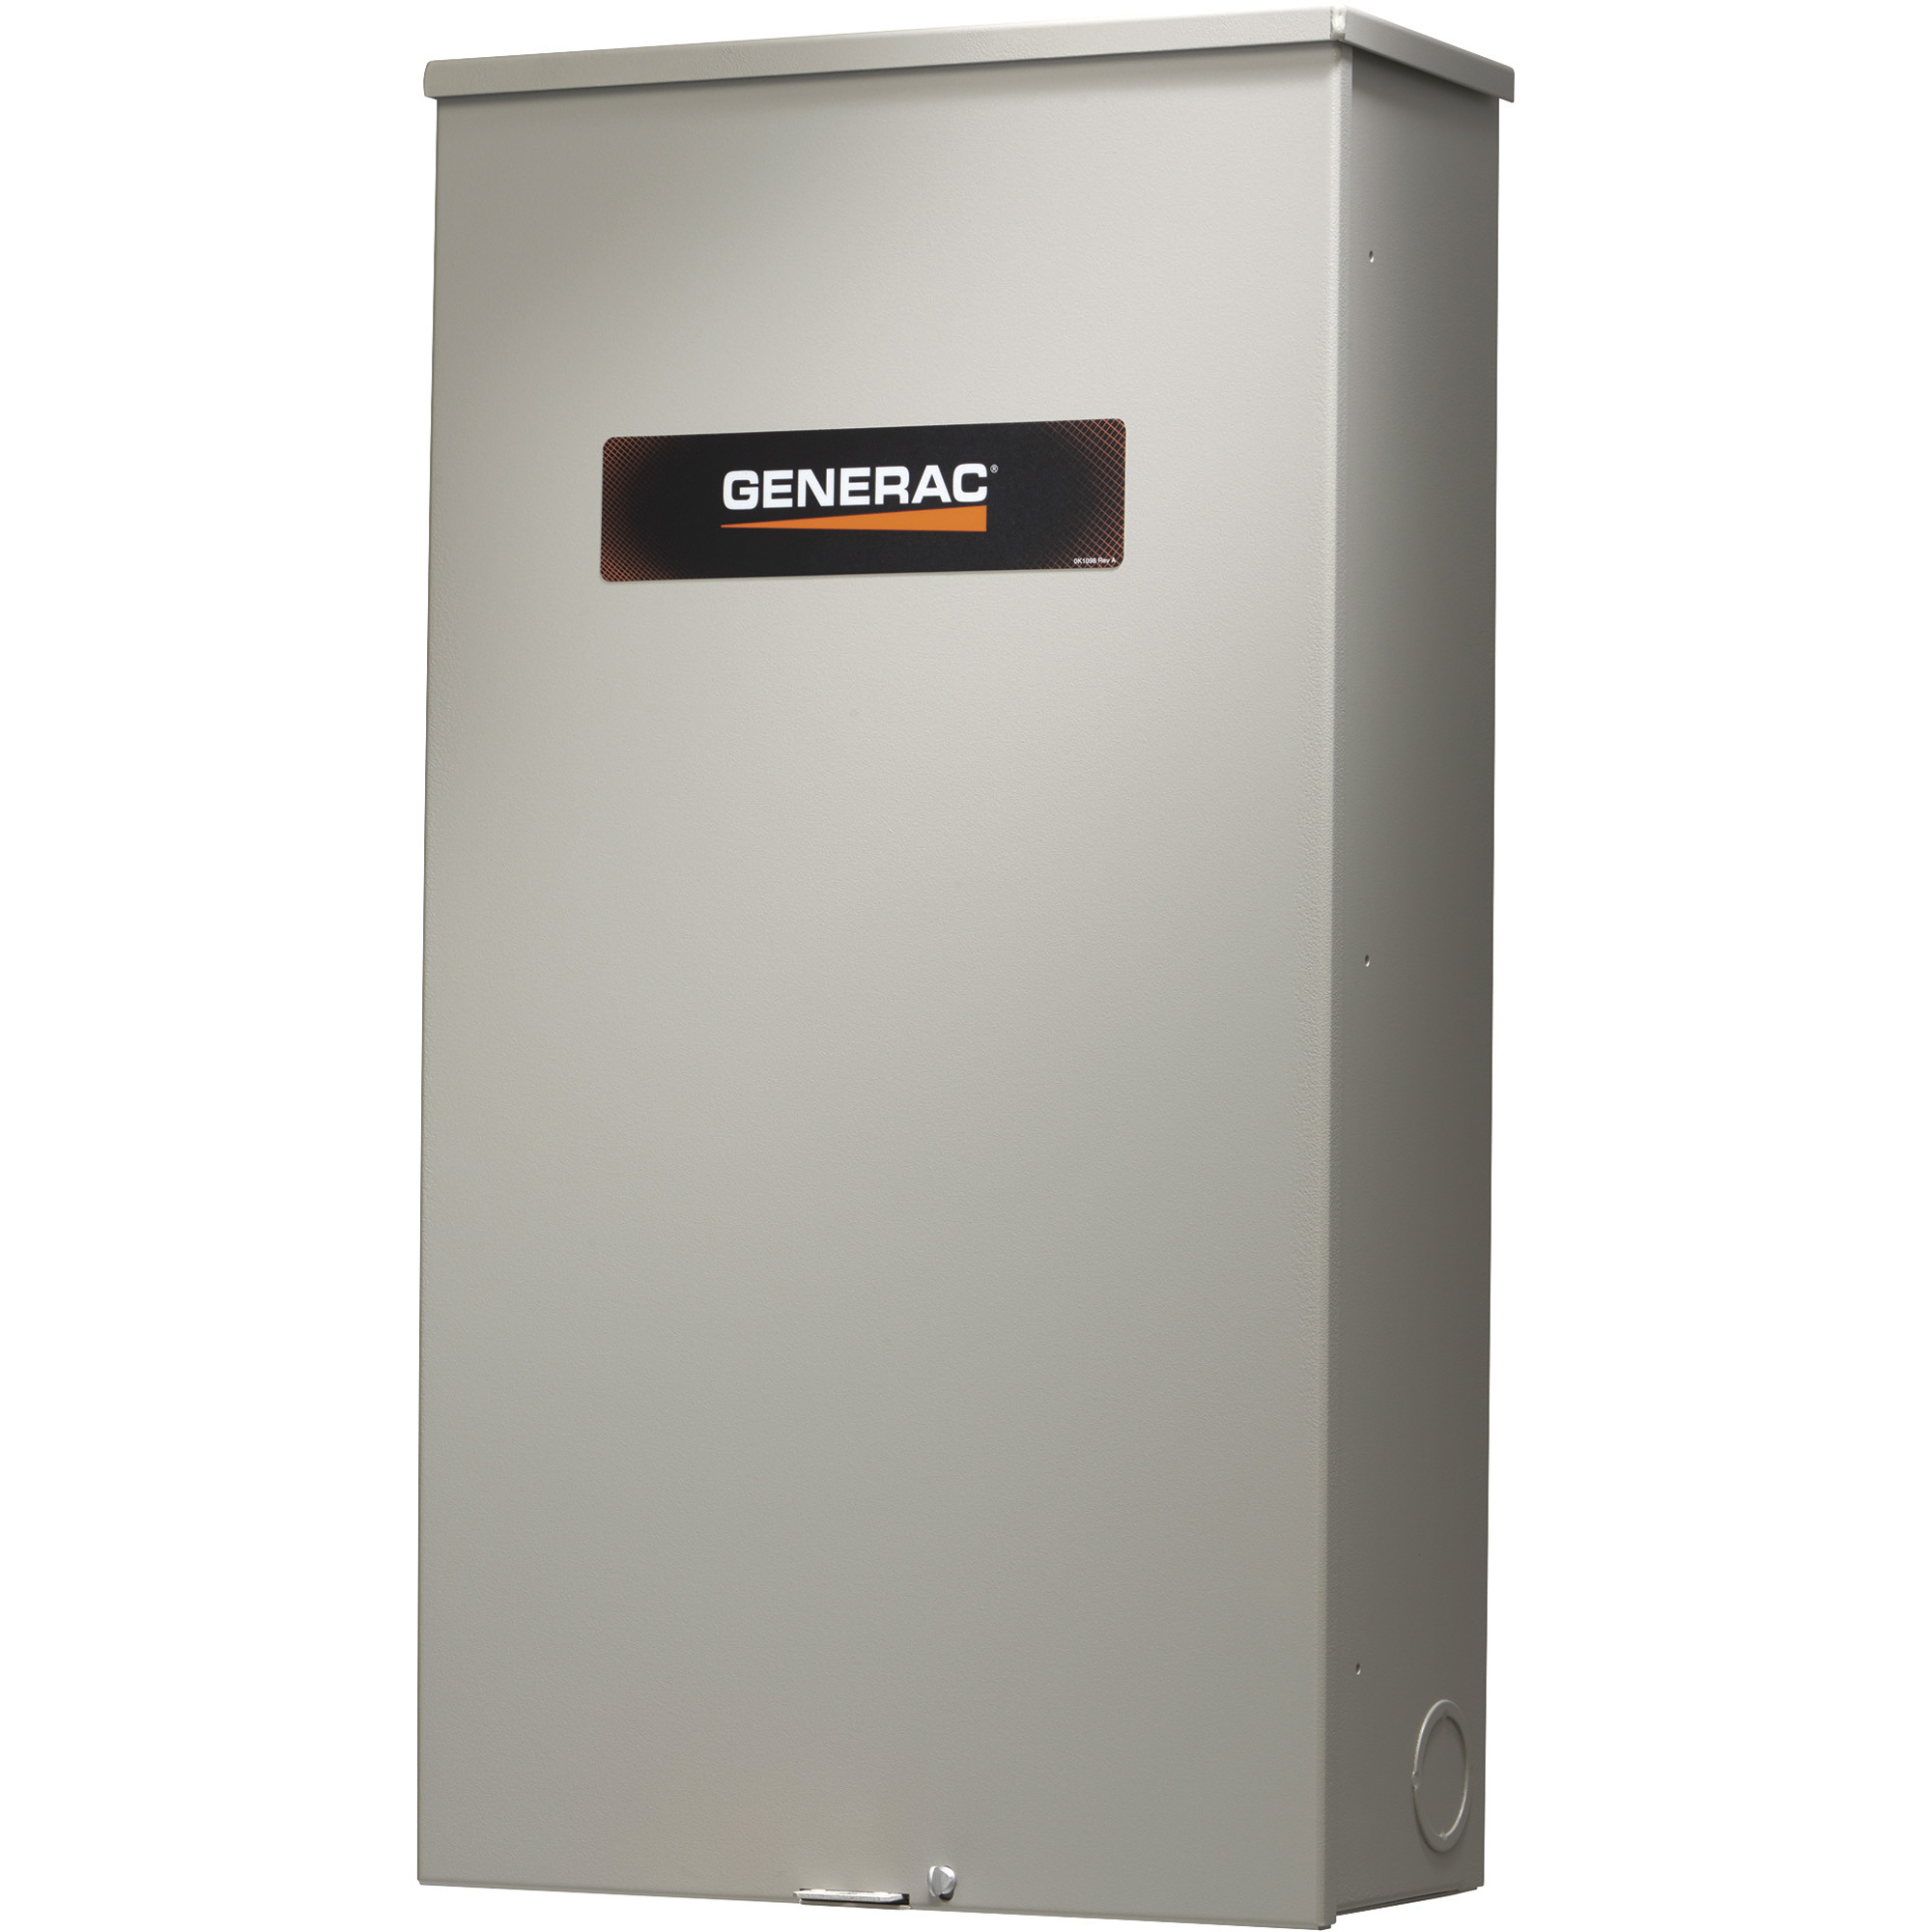 Generac Service Entrance Rated Automatic Transfer Switch, 200 Amps, 120/240 Volts, Single Phase, Model RXSW200A3